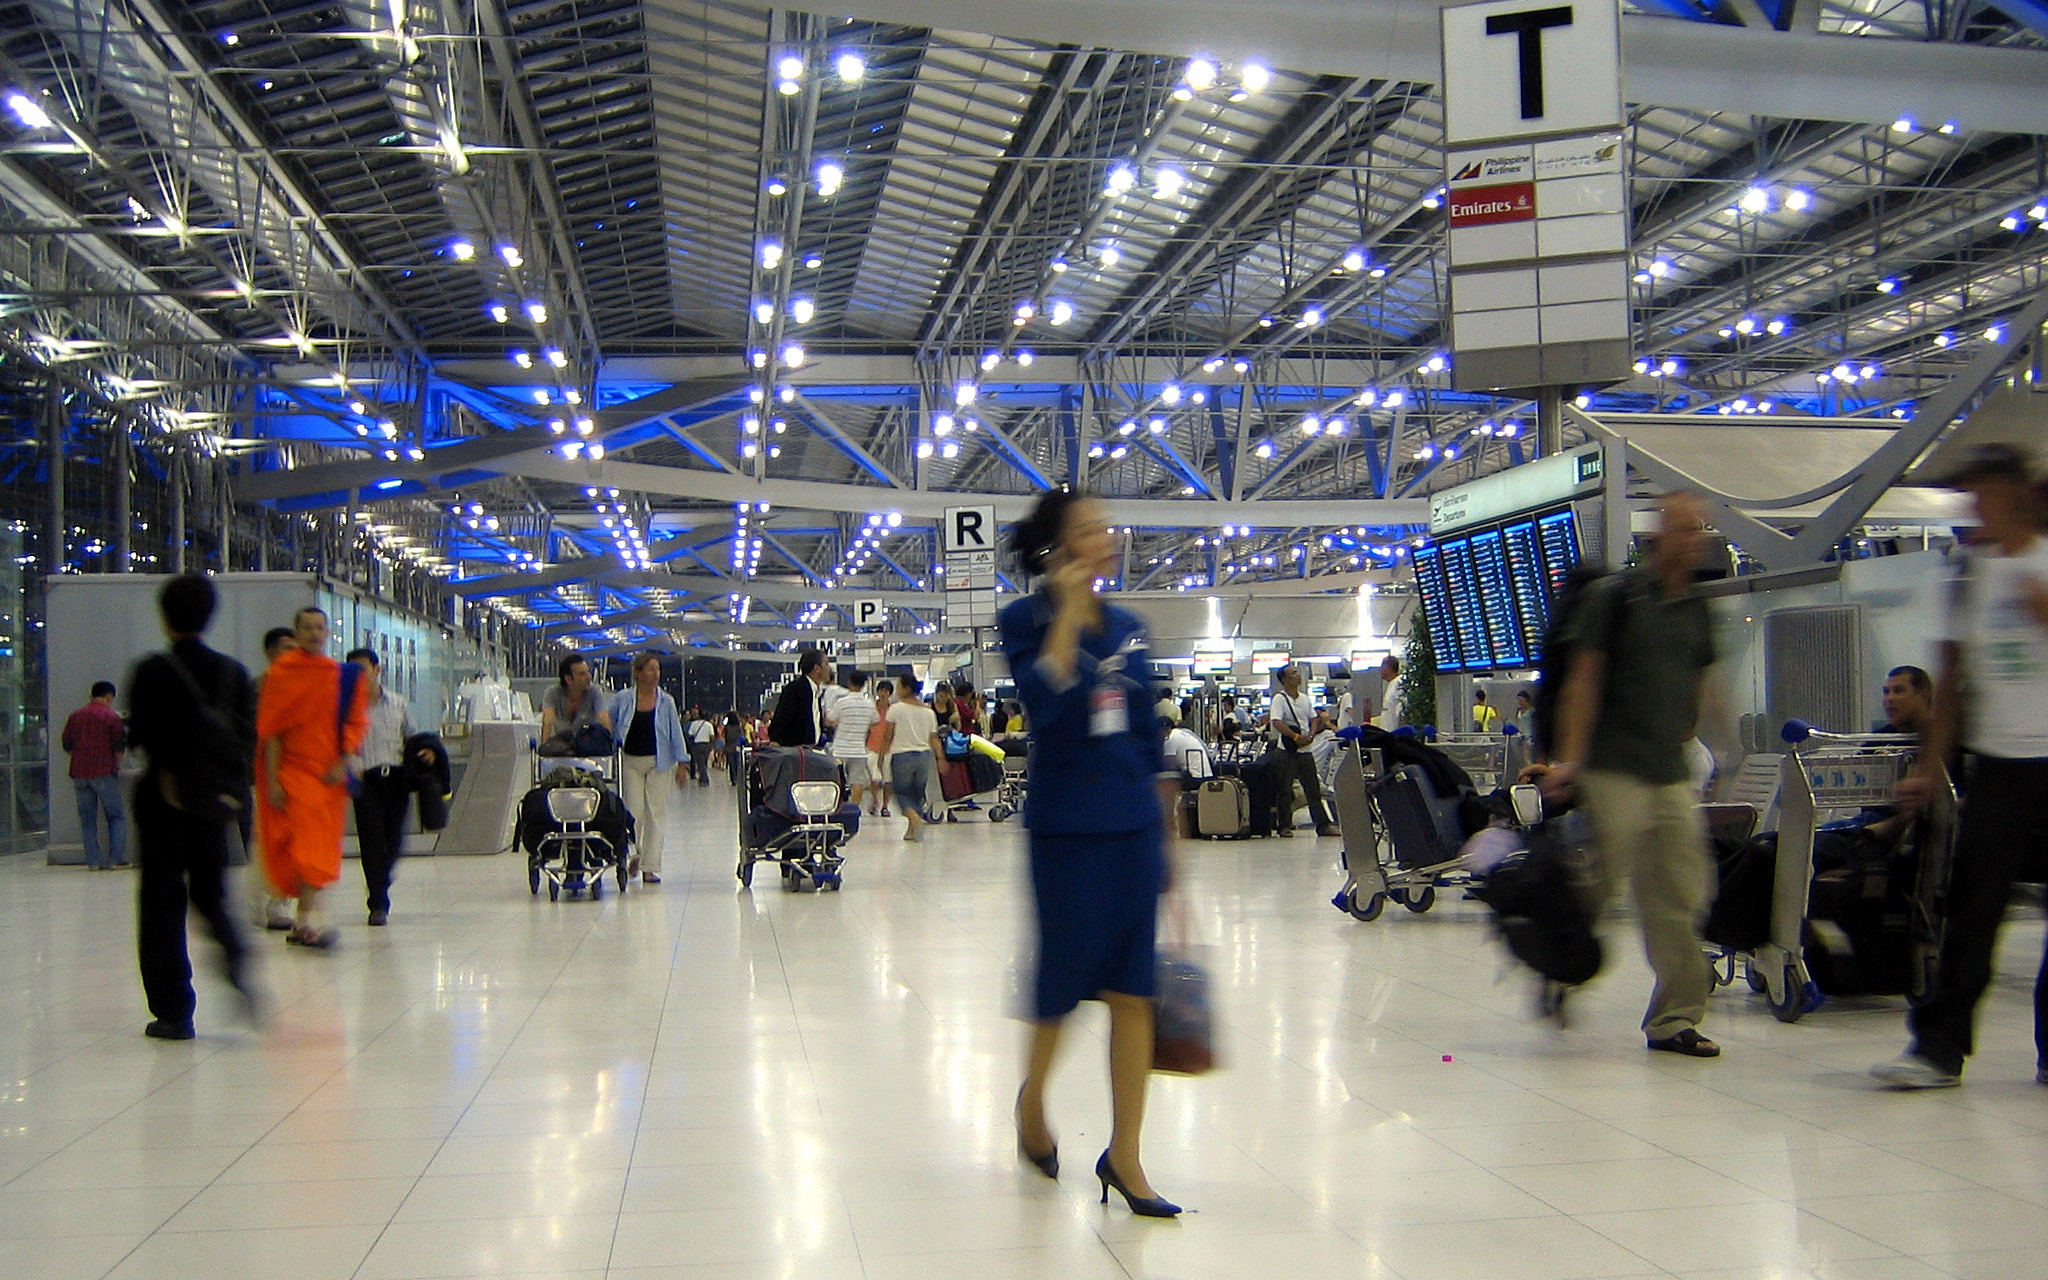 Image: People blurred and moving through a busy airport in Bangkok.